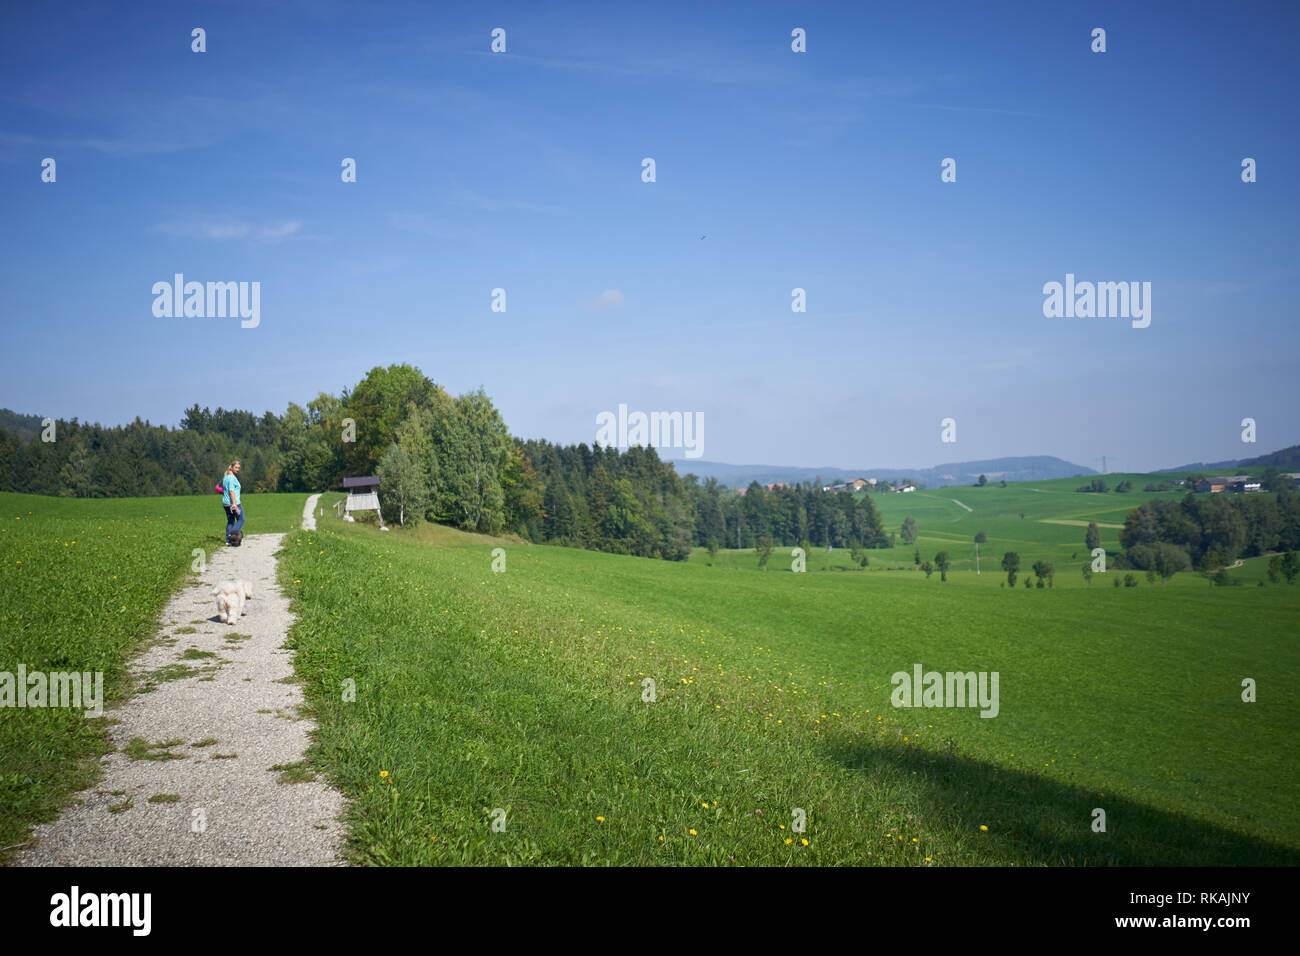 Women hiking with havanase dogs on road in the sun in meadows and mountains Stock Photo